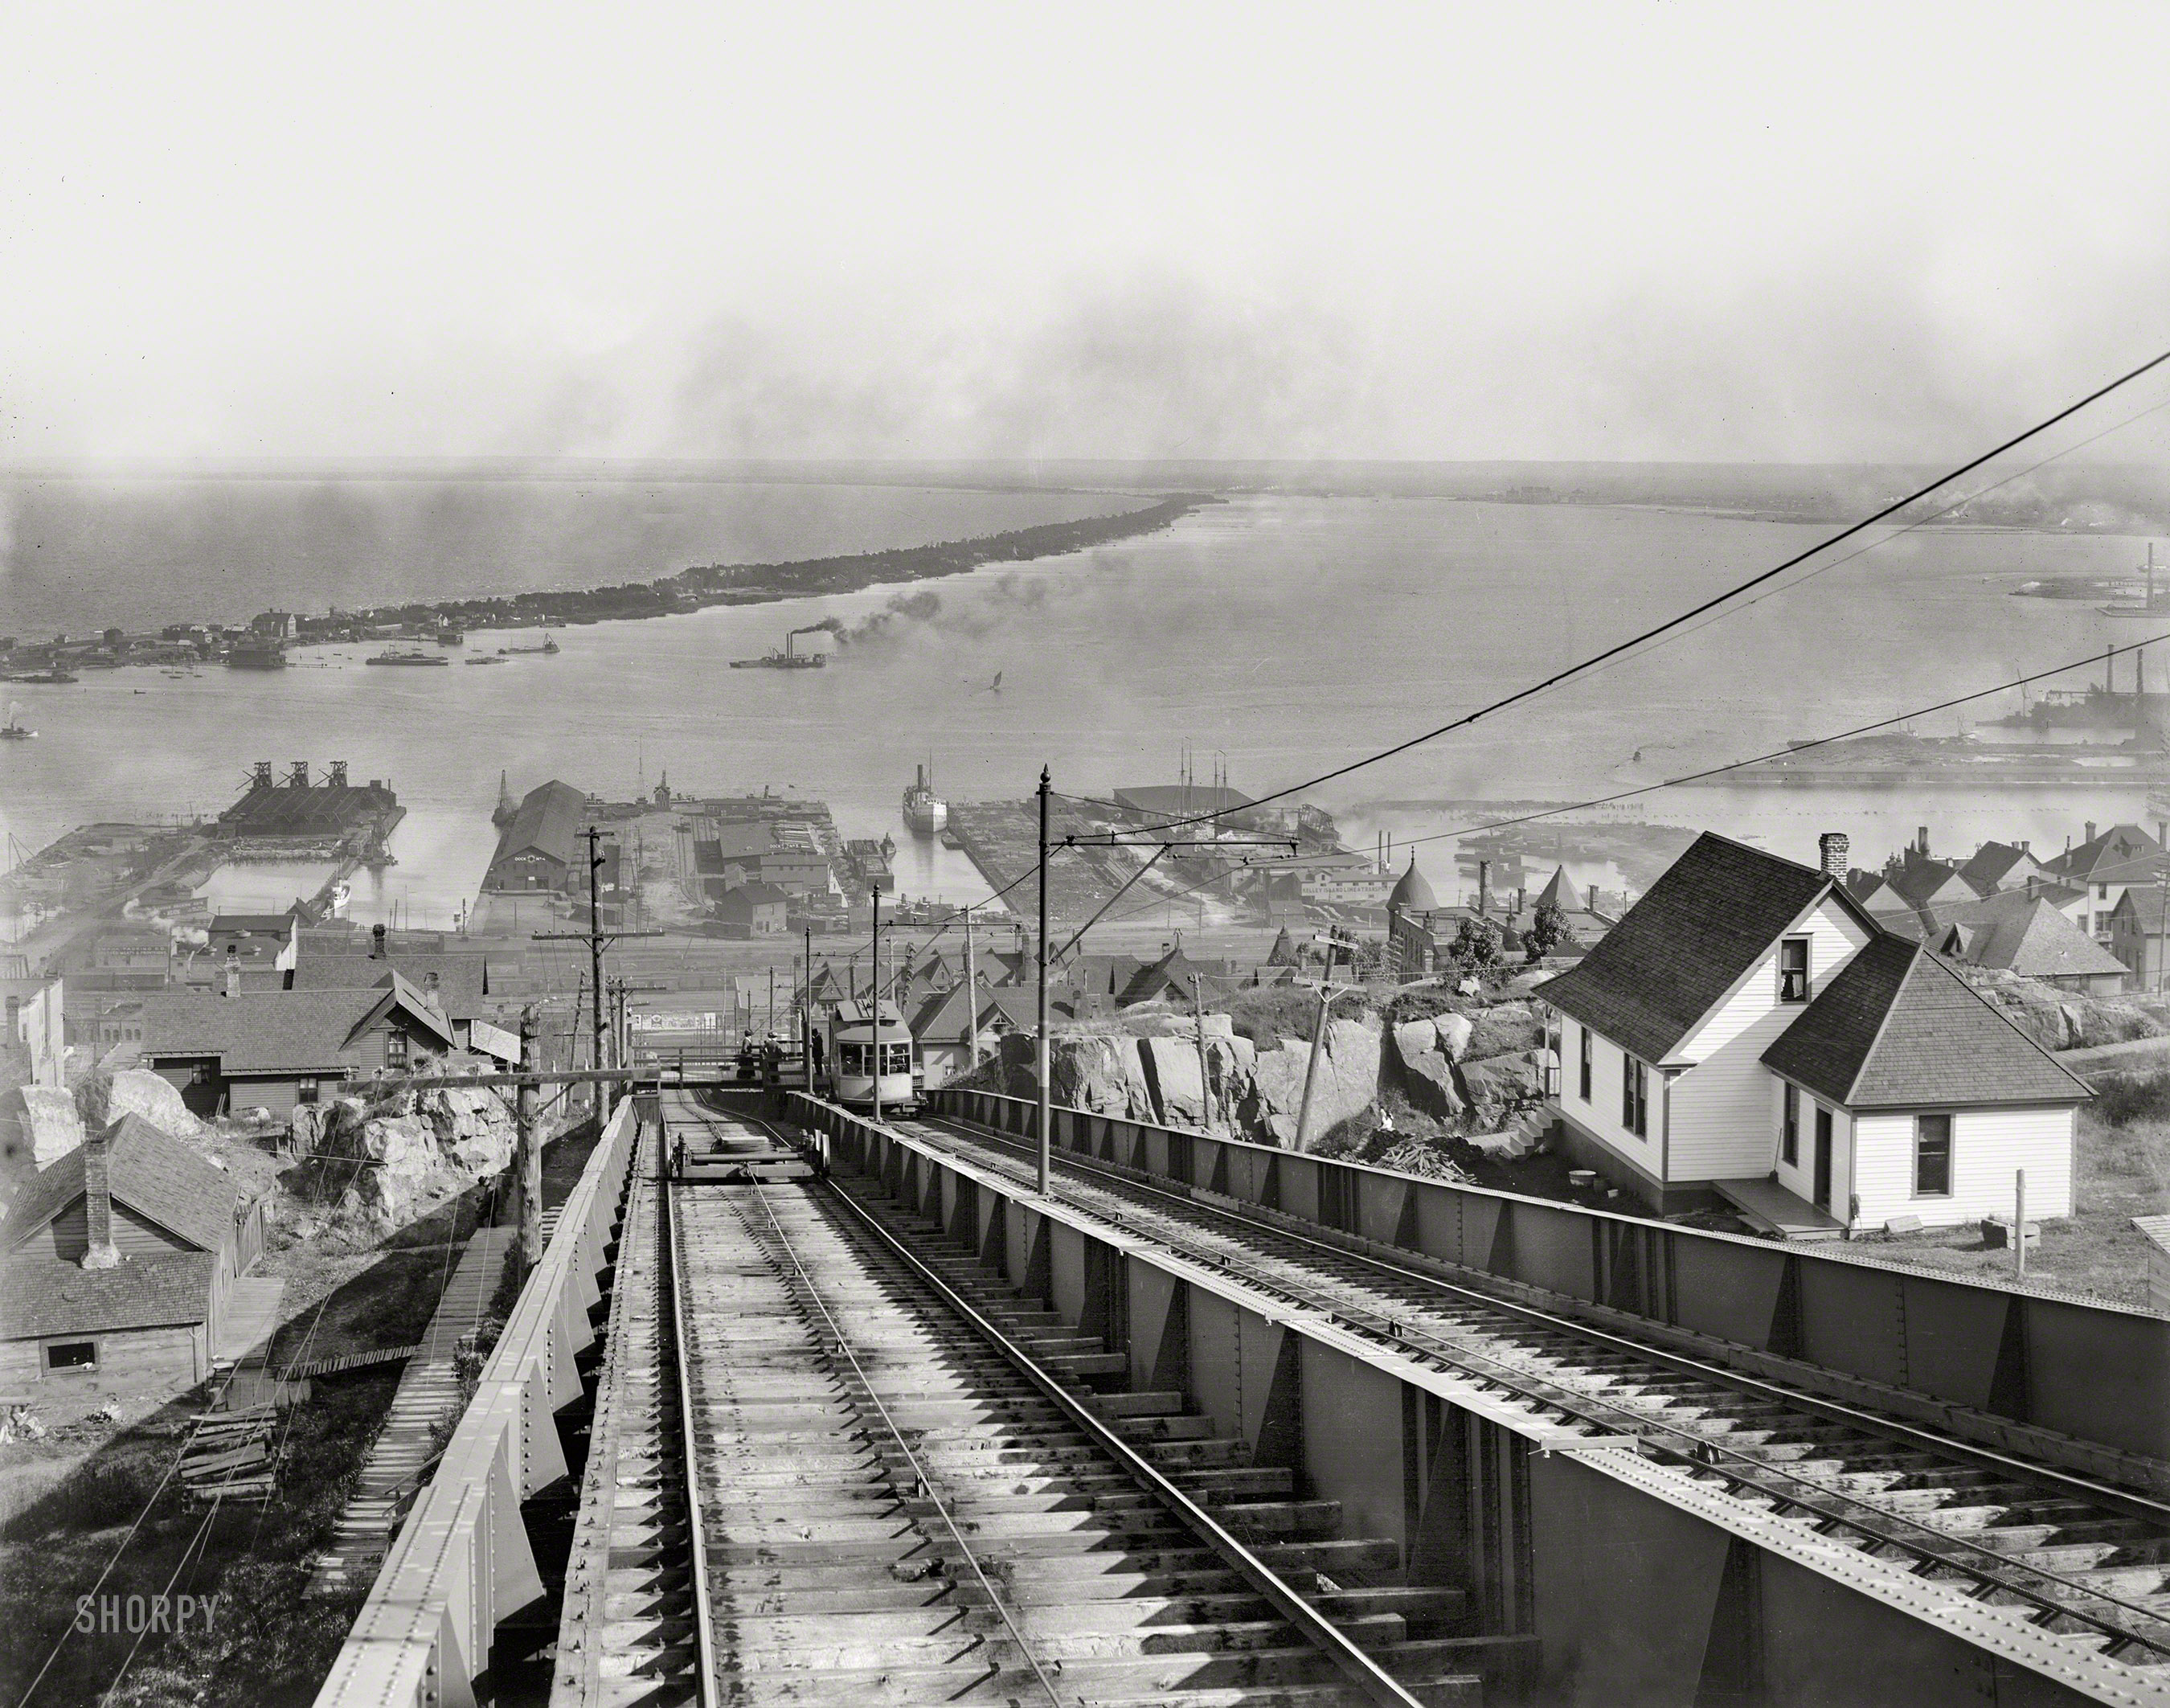 Circa 1905. "Minnesota Point from Incline Railway, Duluth." Our third look this week at the Zenith City. Detroit Publishing Co. glass negative. View full size.